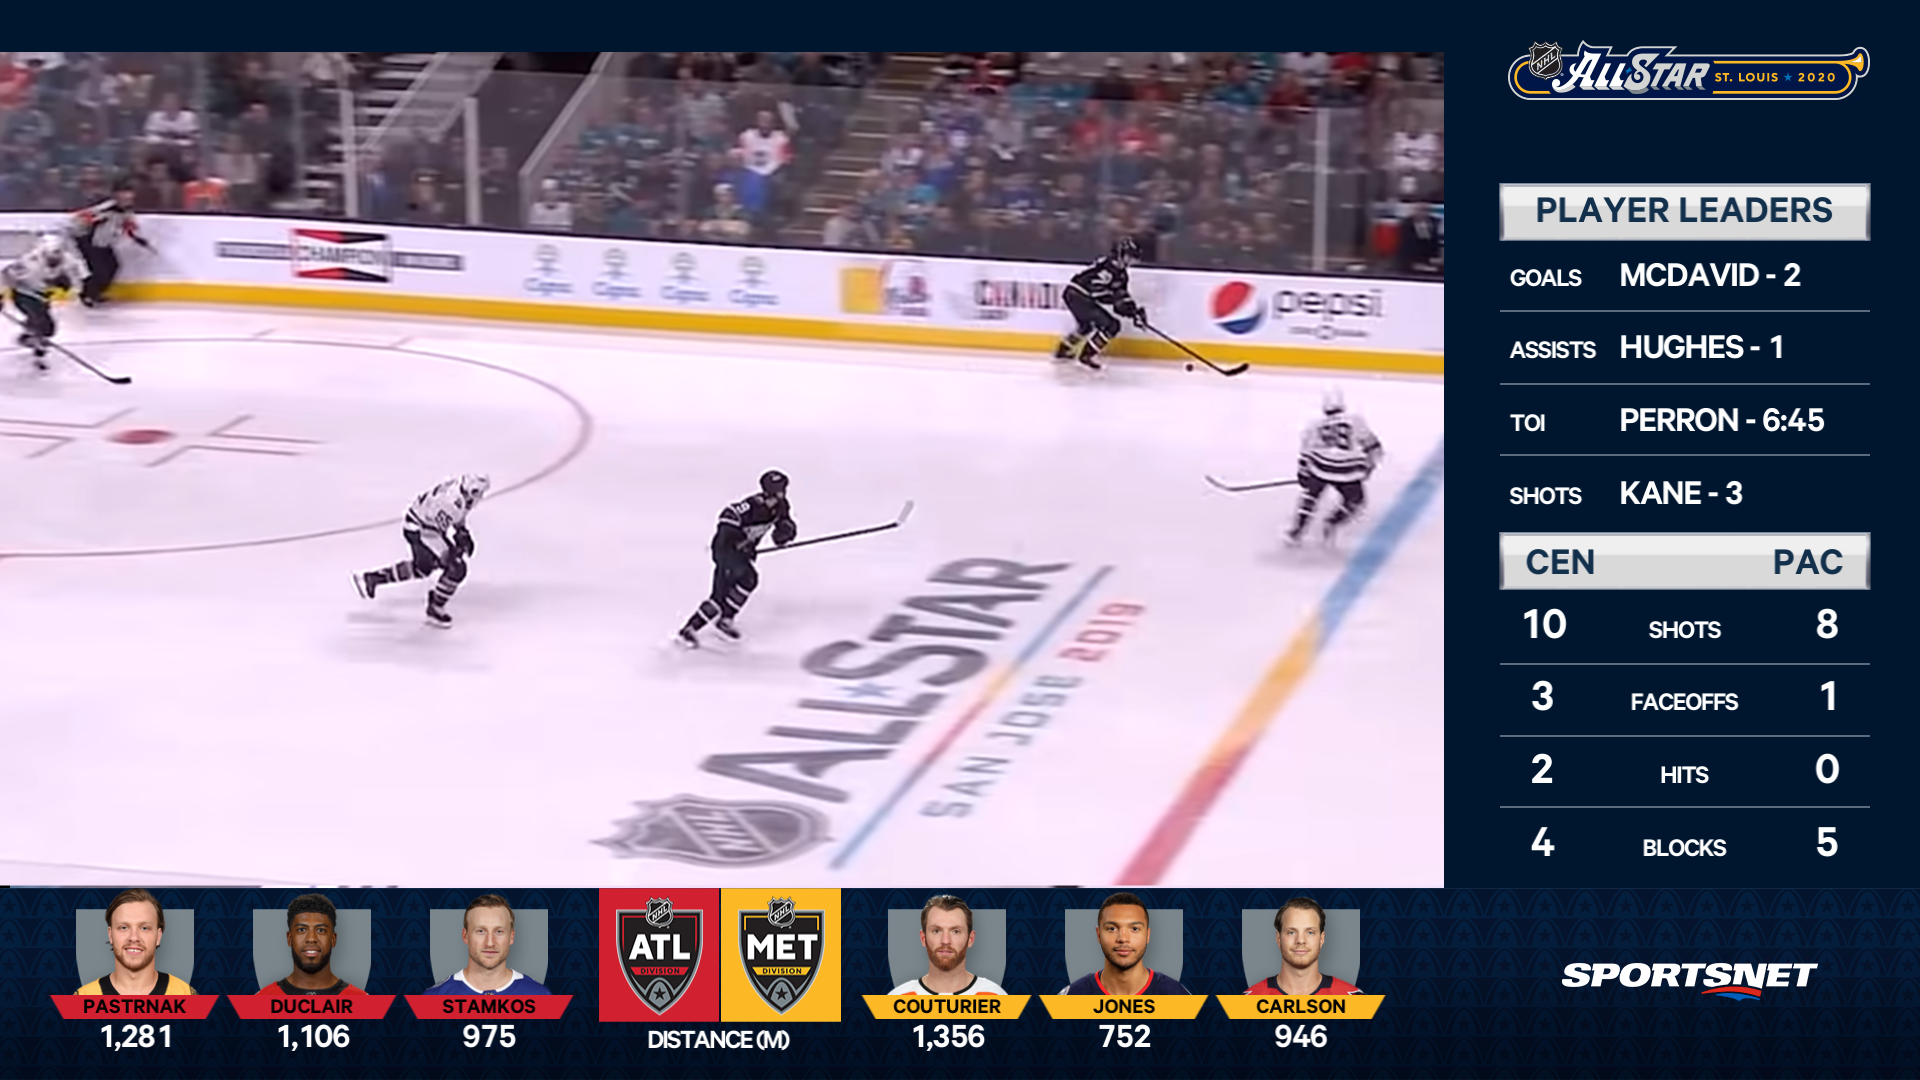 New technology, graphics, statistics brought to NHL telecasts